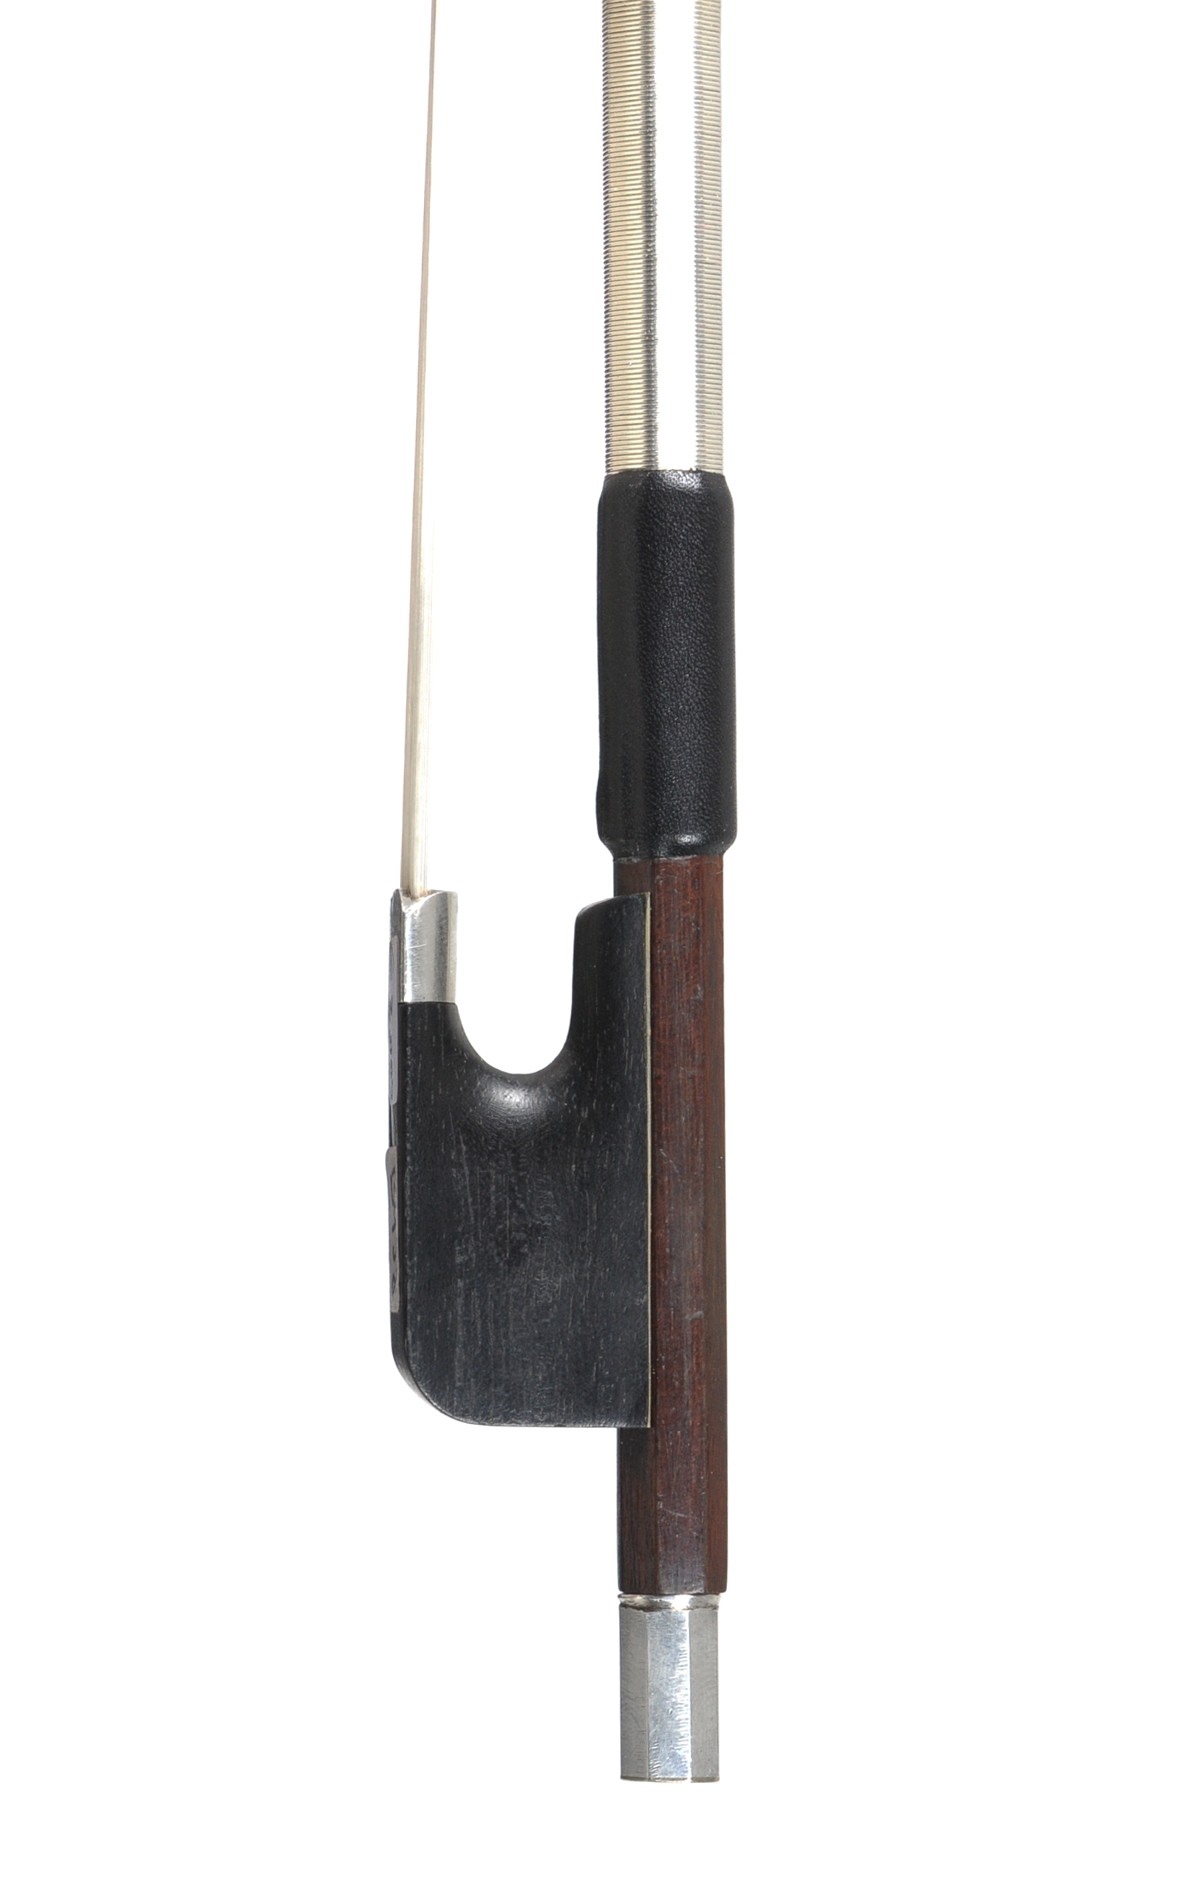 French violin bow by Auguste Husson, "Husson-Mariet" - frog